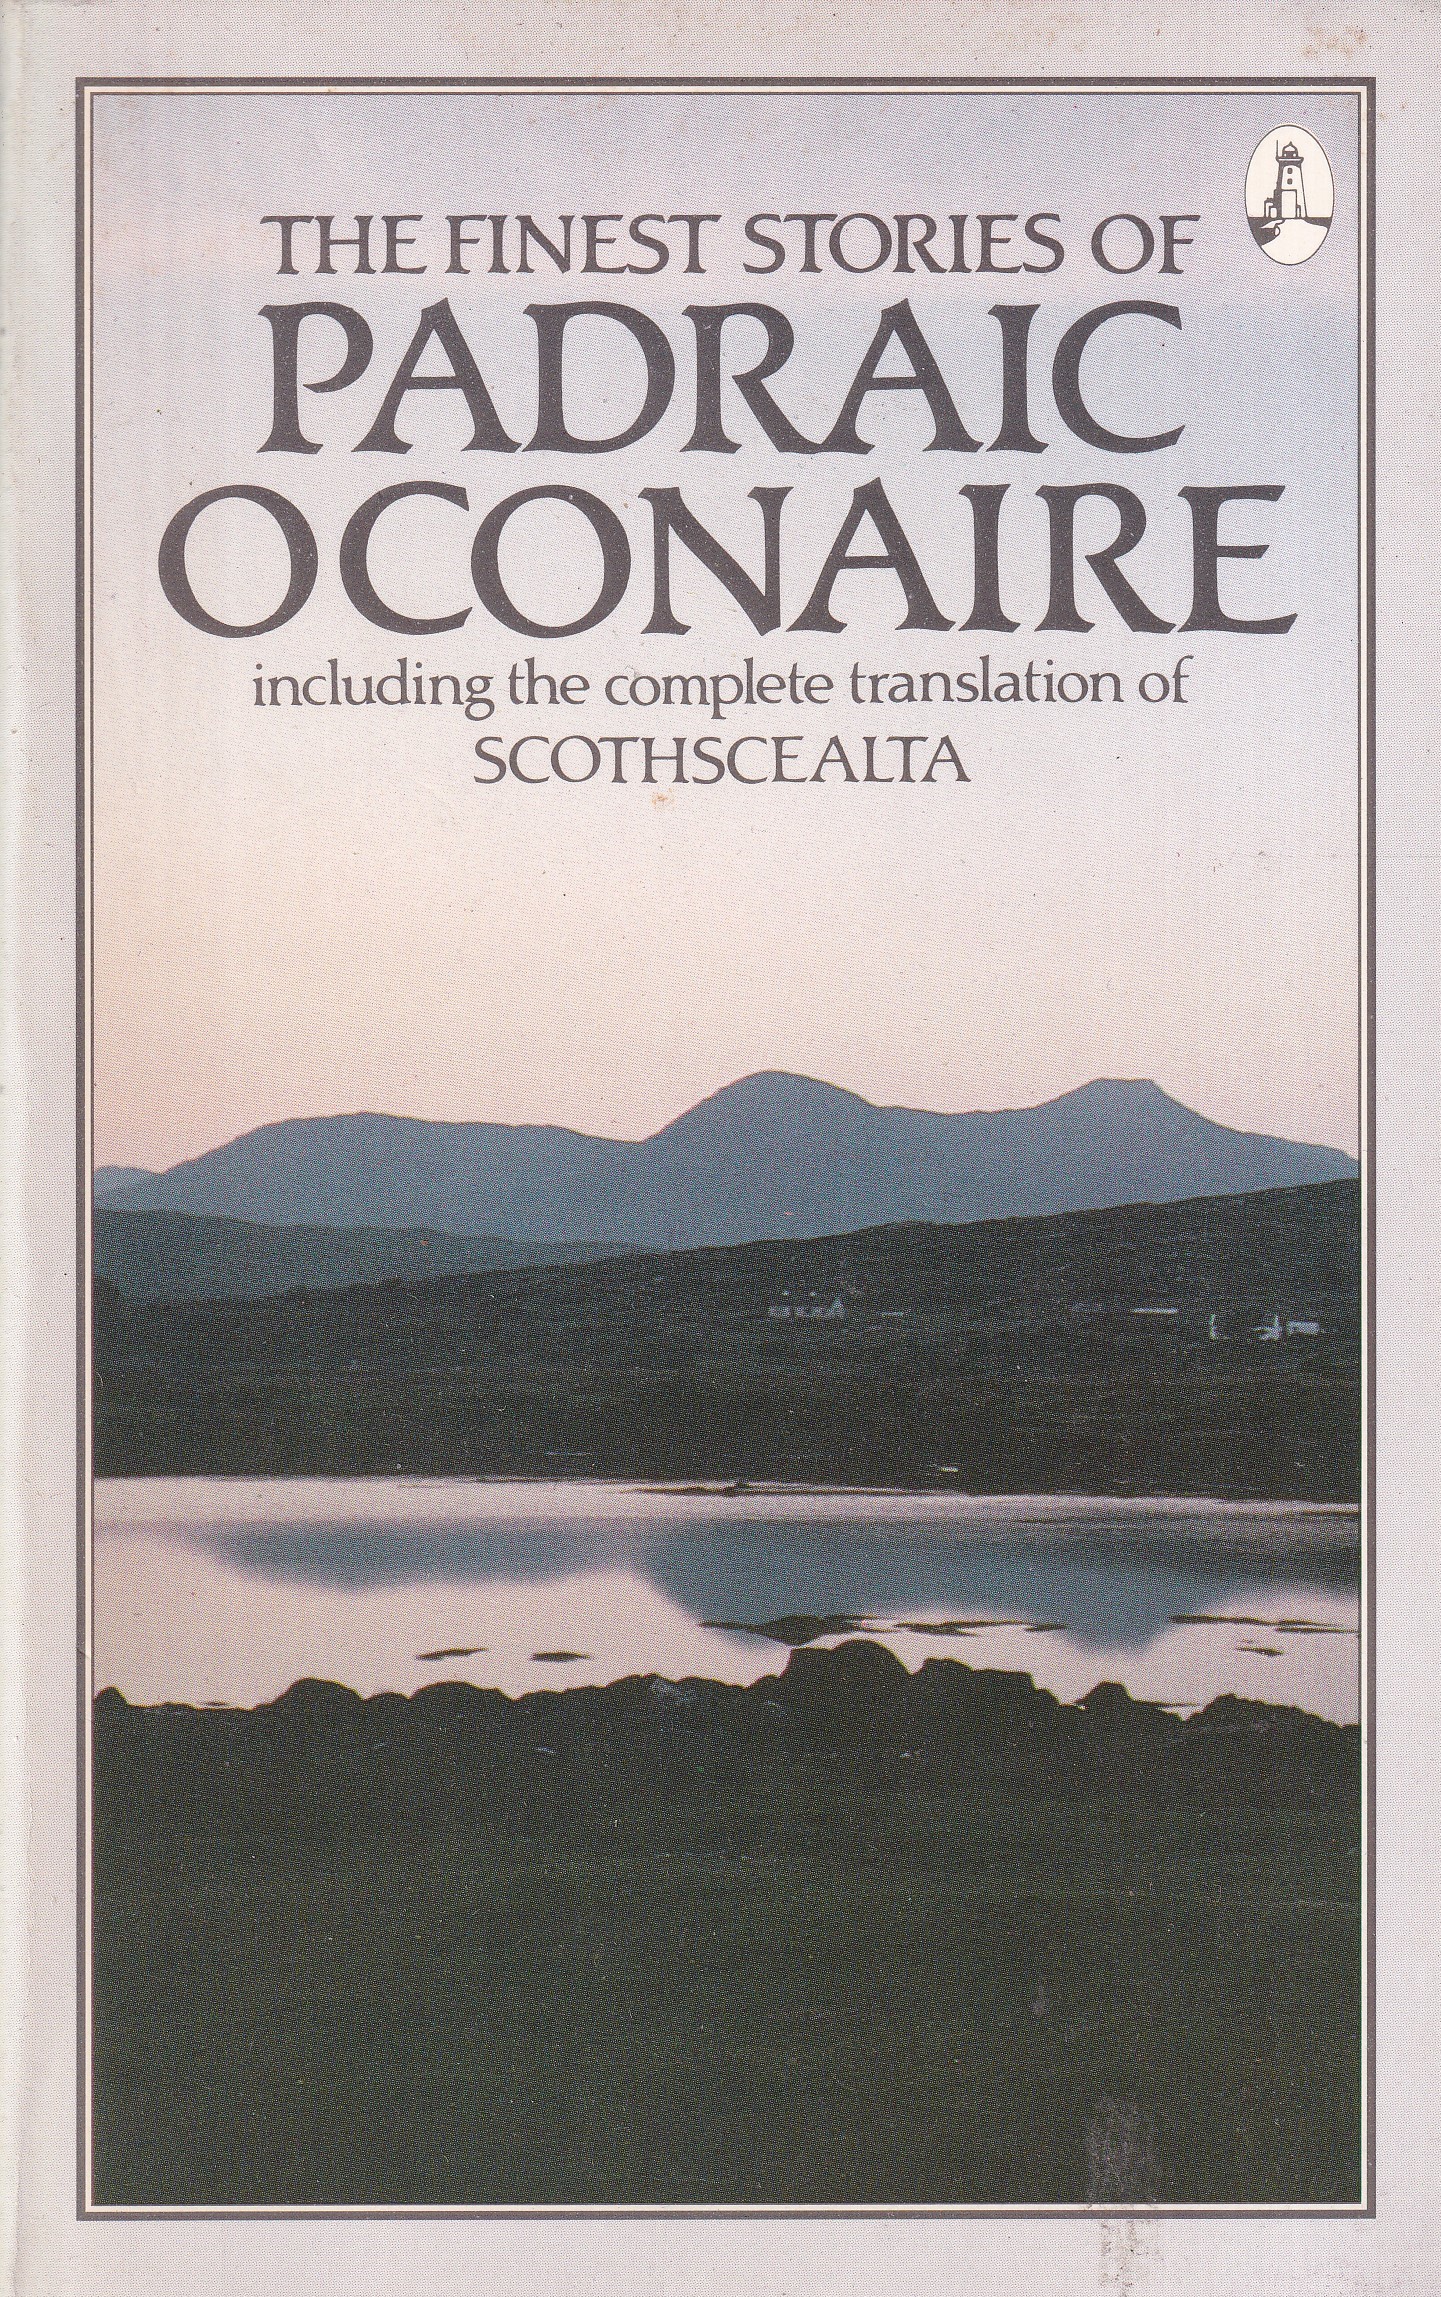 The Finest Stories of Padraic O’Conaire by Padraic O'Conaire